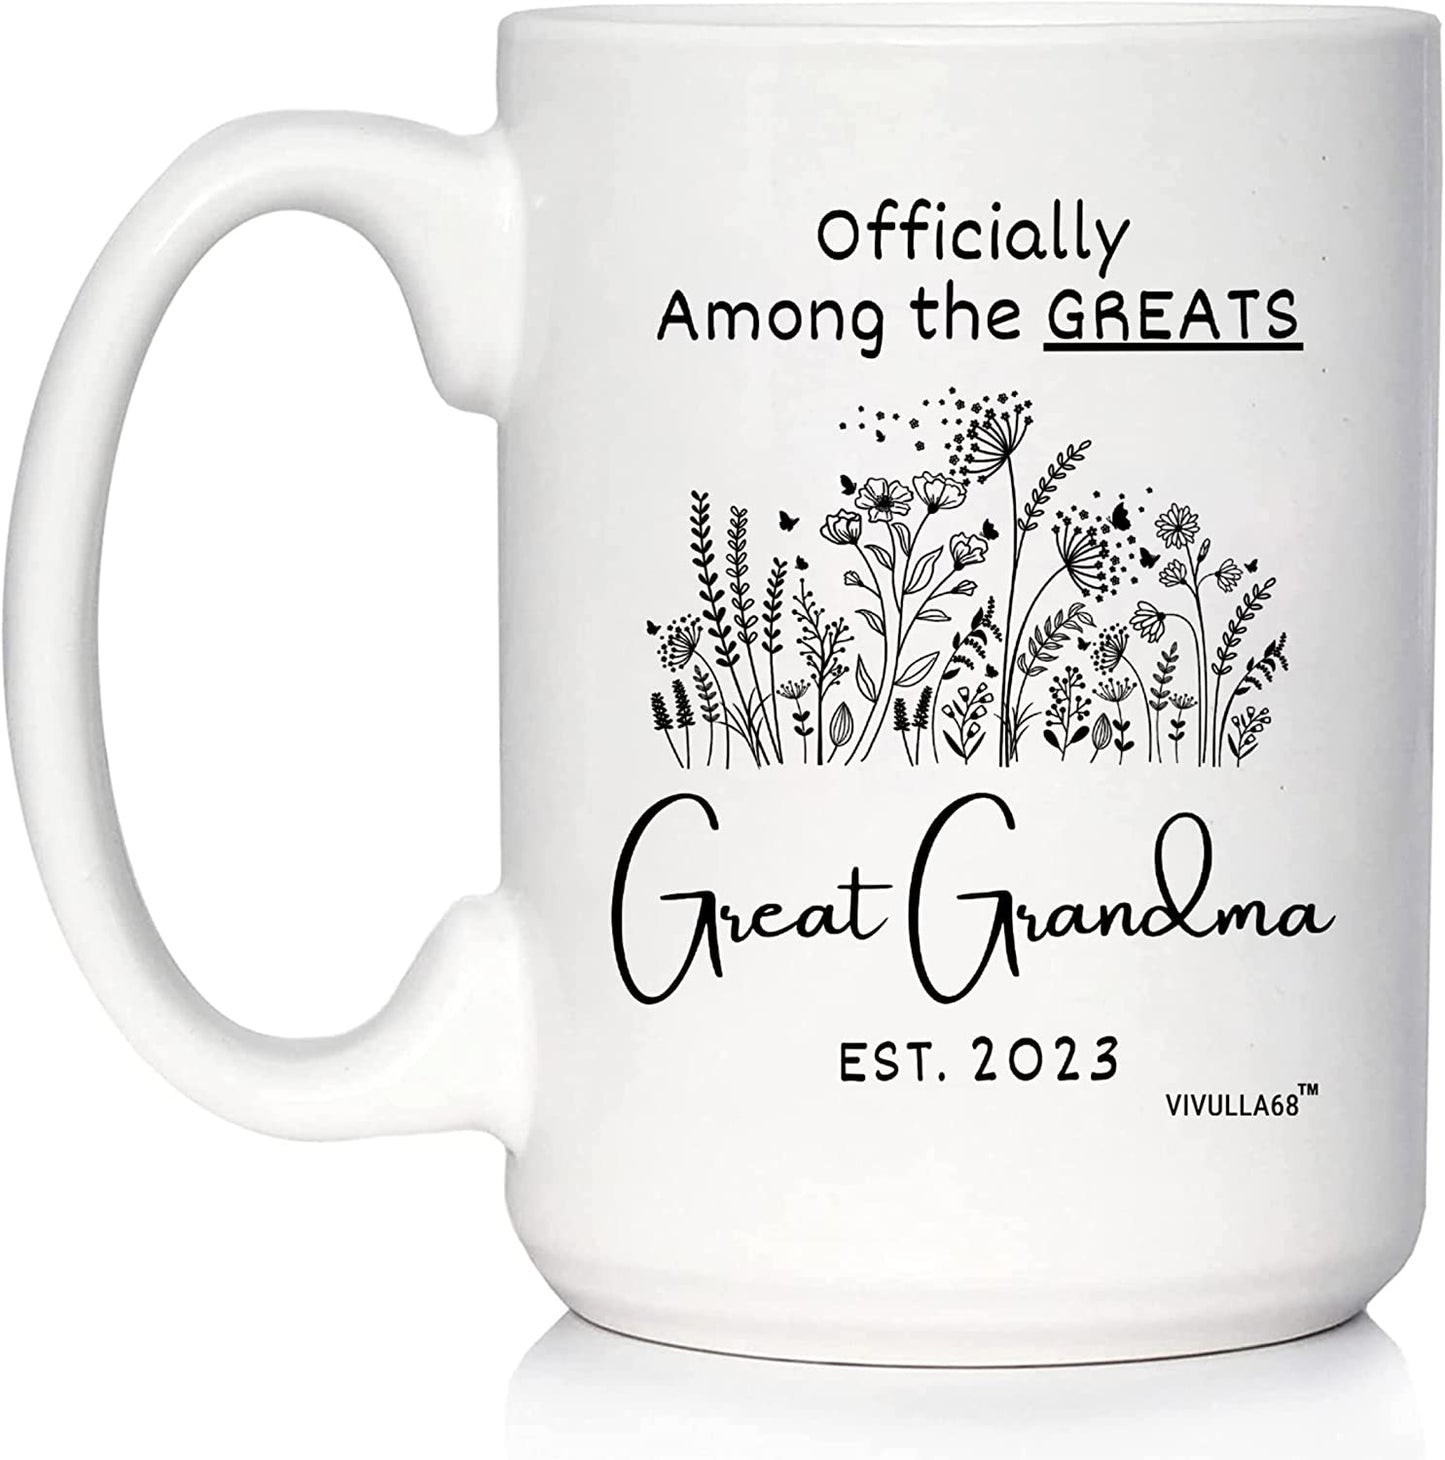 Great Grandma Mug 2023, New Great Grandma Gifts, Youre Going To Be Great Grandparents, Great Grandma Christmas Gifts, Presents For Great Grandma Pregnancy Announcement, Great Grandmother Gifts